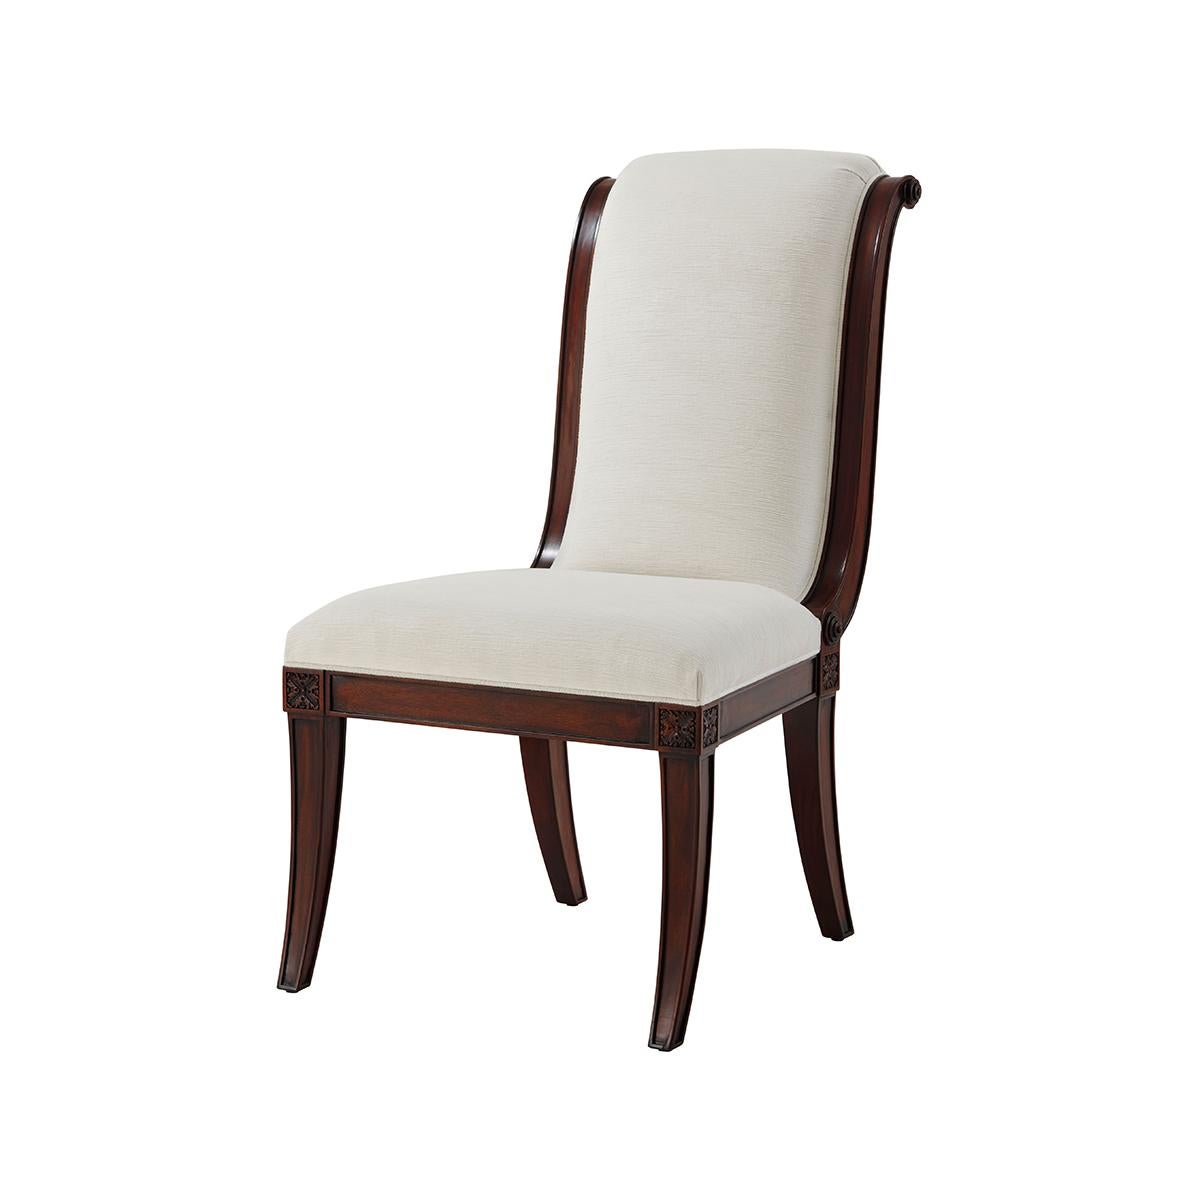 Large mahogany side chairs, with an over scroll padded back and seat above floral capital carved and paneled sabre legs. Inspired by a 19th-century French original.
Dimensions: 23